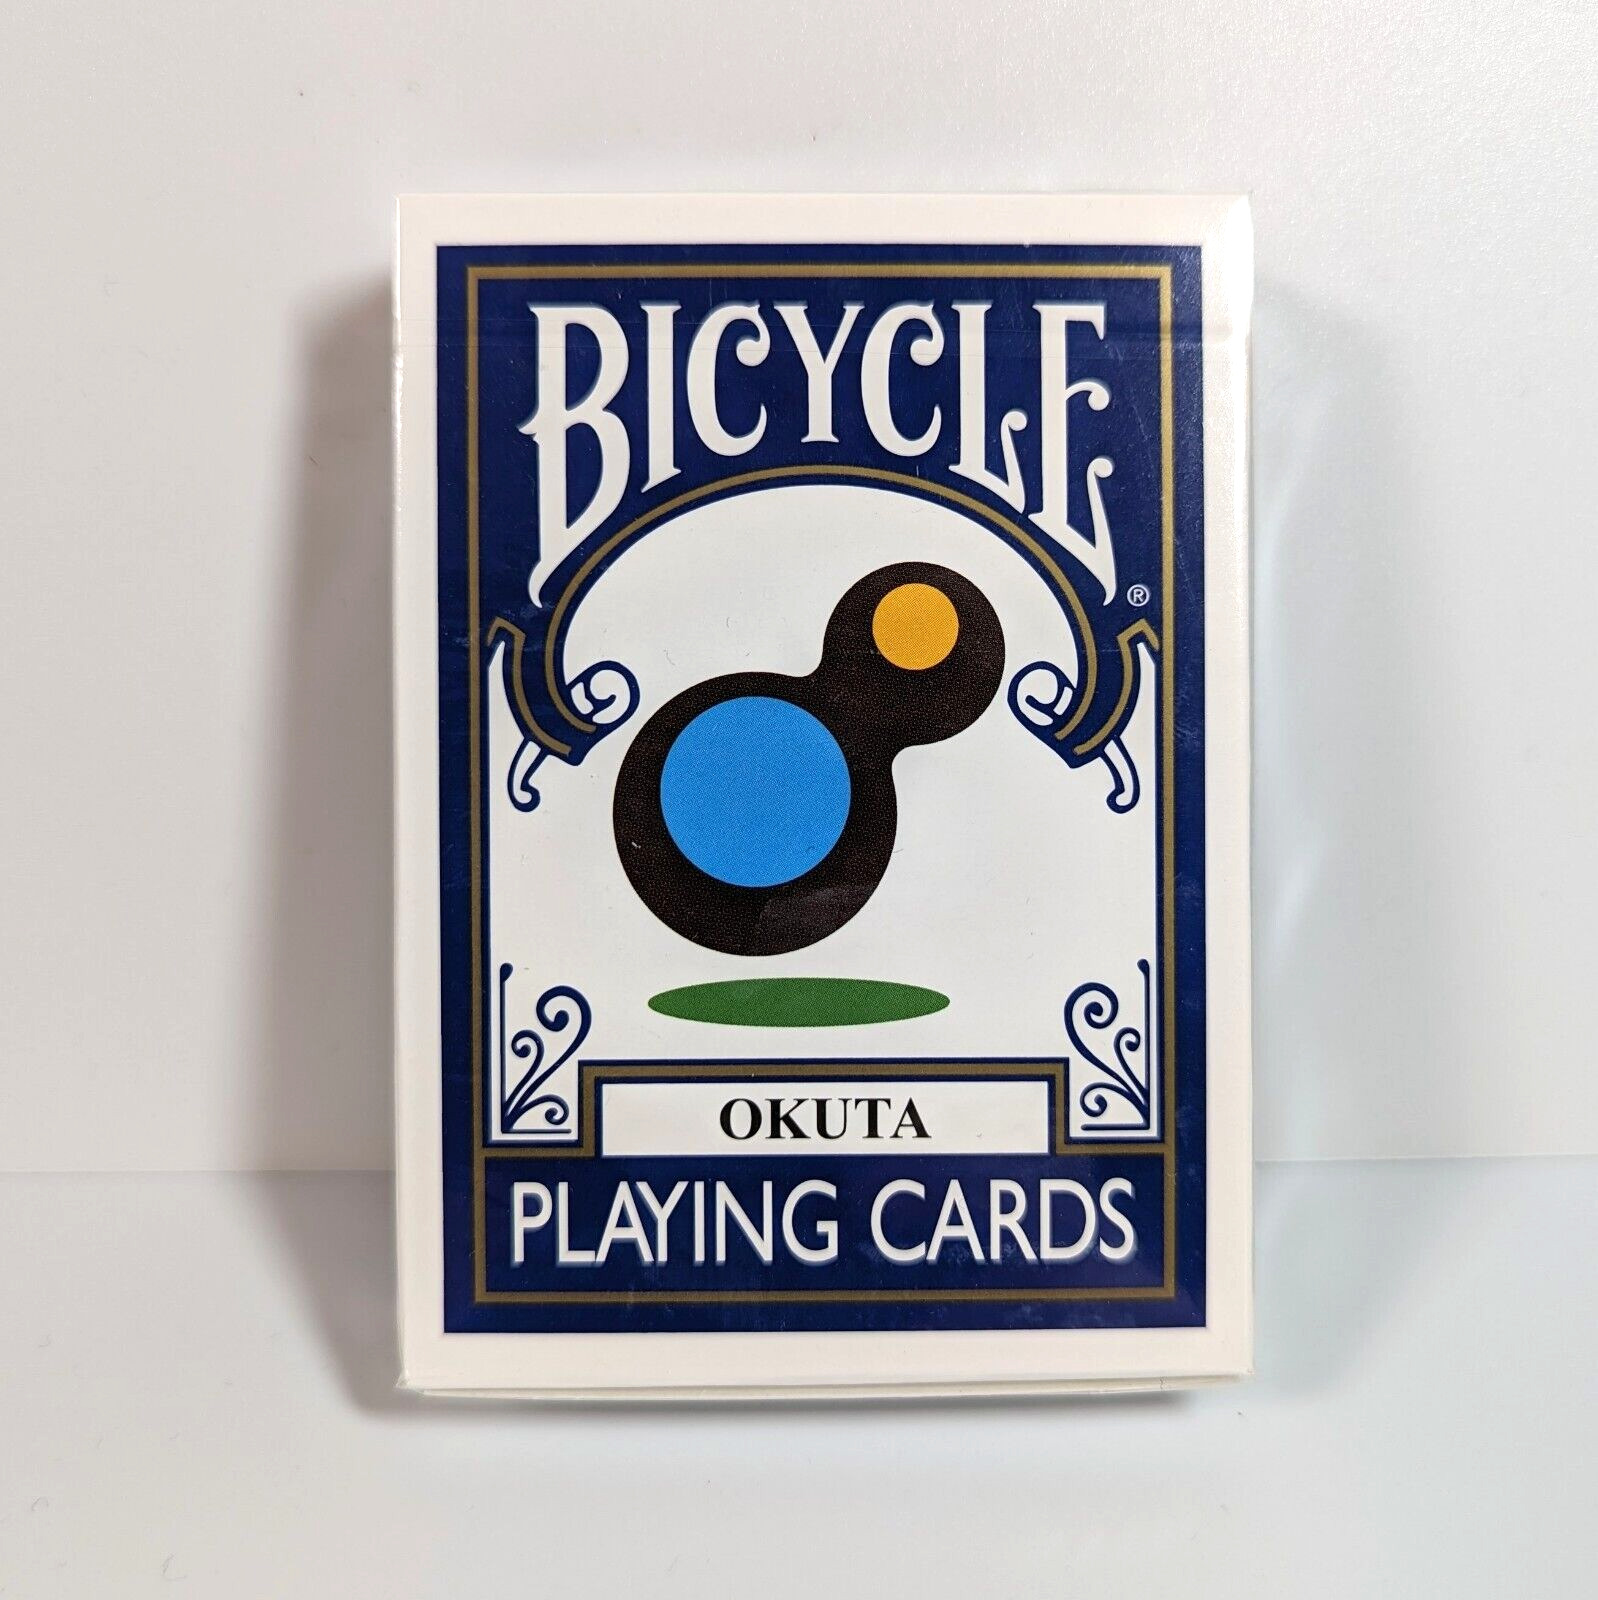 Bicycle Deck of Playing Cards OKUTA Limited Edition Rare Sealed New from Japan